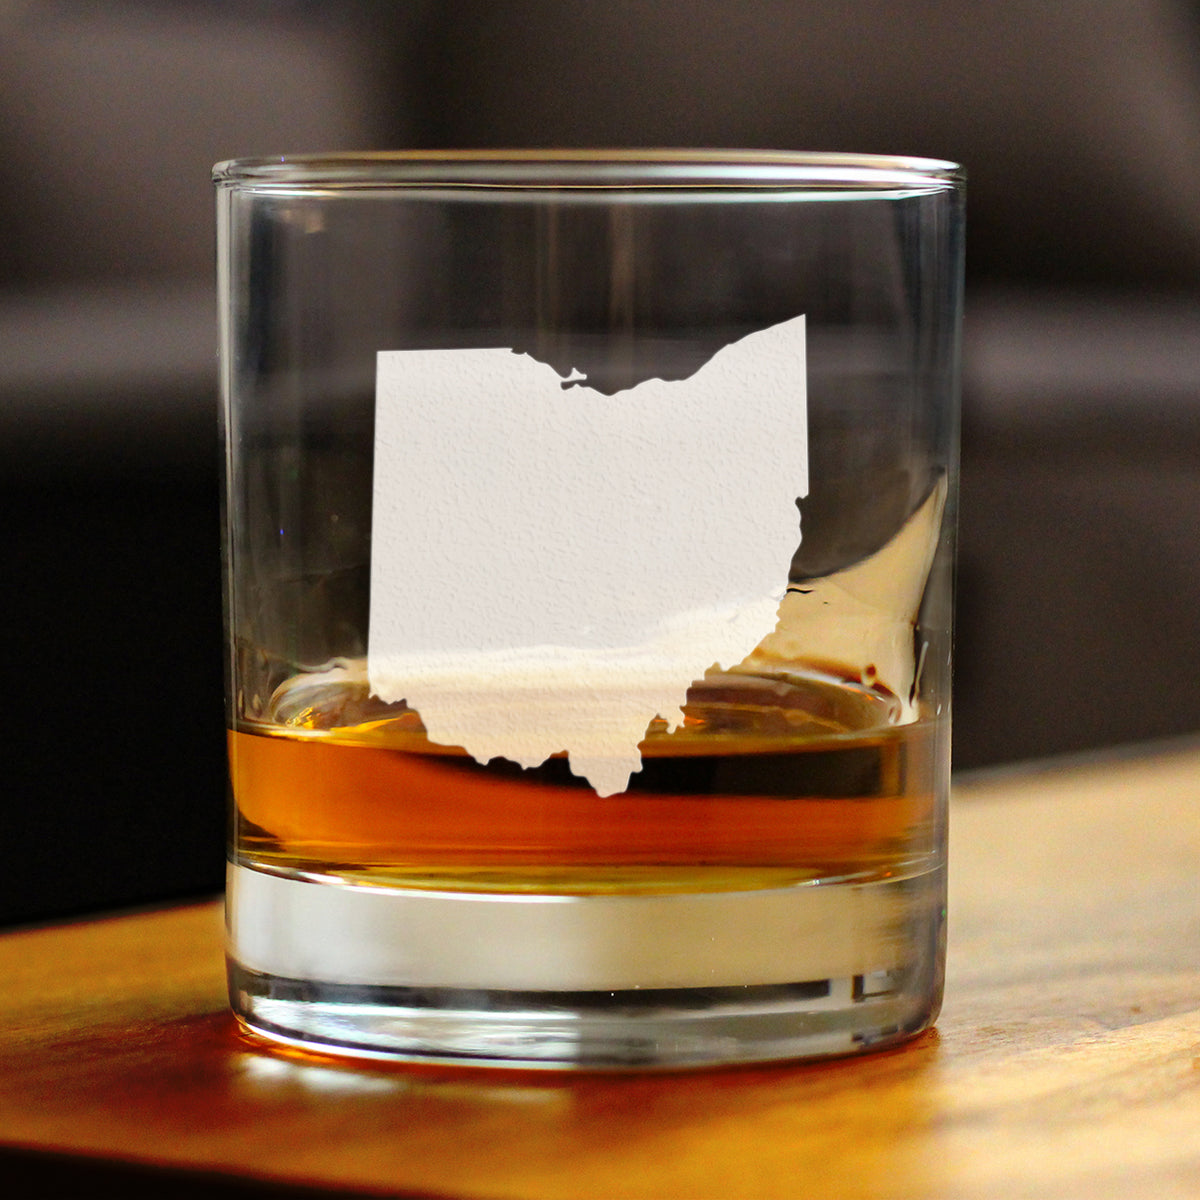 Ohio State Outline Whiskey Rocks Glass - State Themed Drinking Decor and Gifts for Ohioan Women &amp; Men - 10.25 Oz Whisky Tumbler Glasses